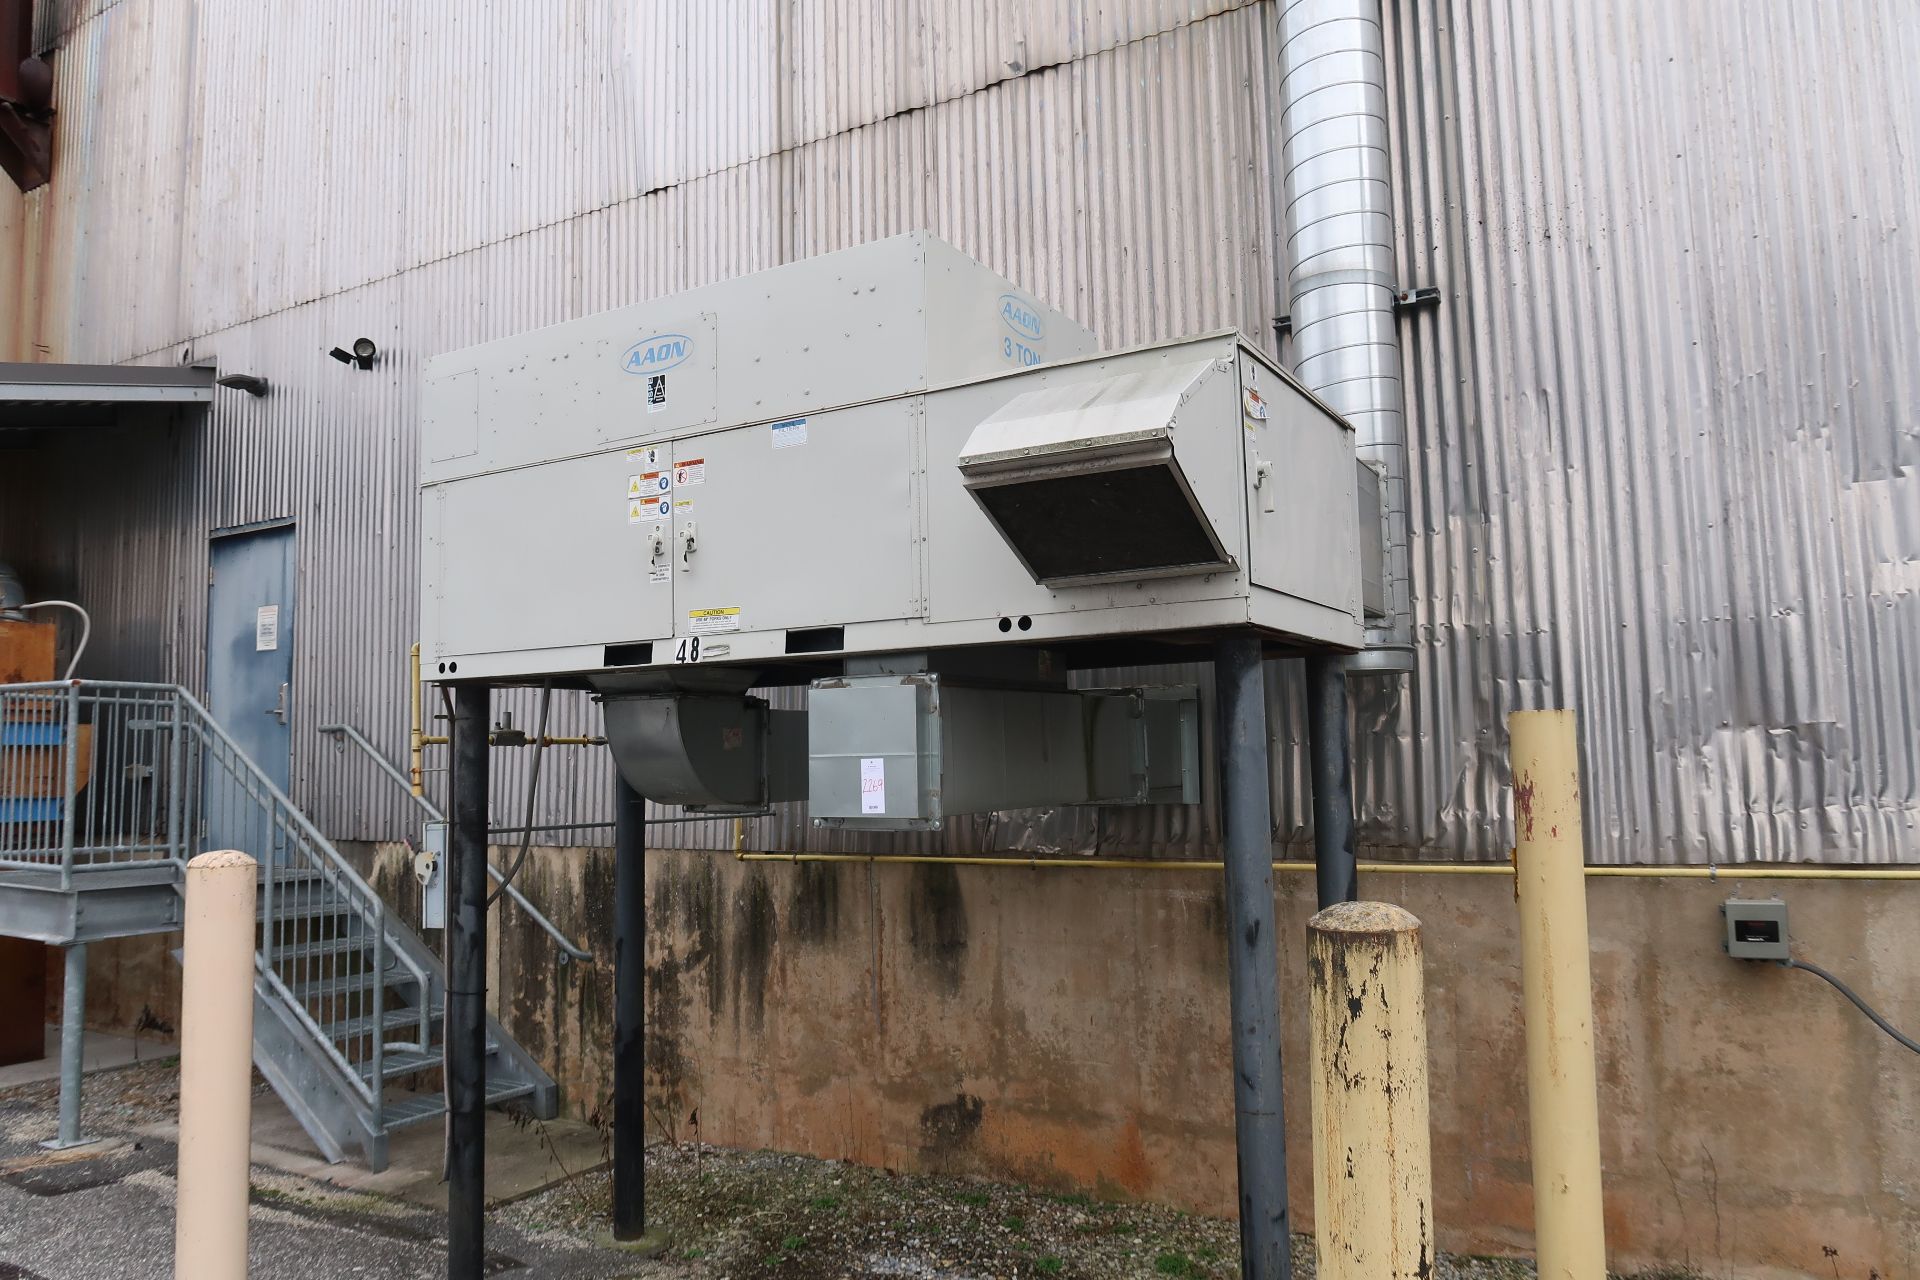 3 Ton Aaon Chiller - Image 2 of 3